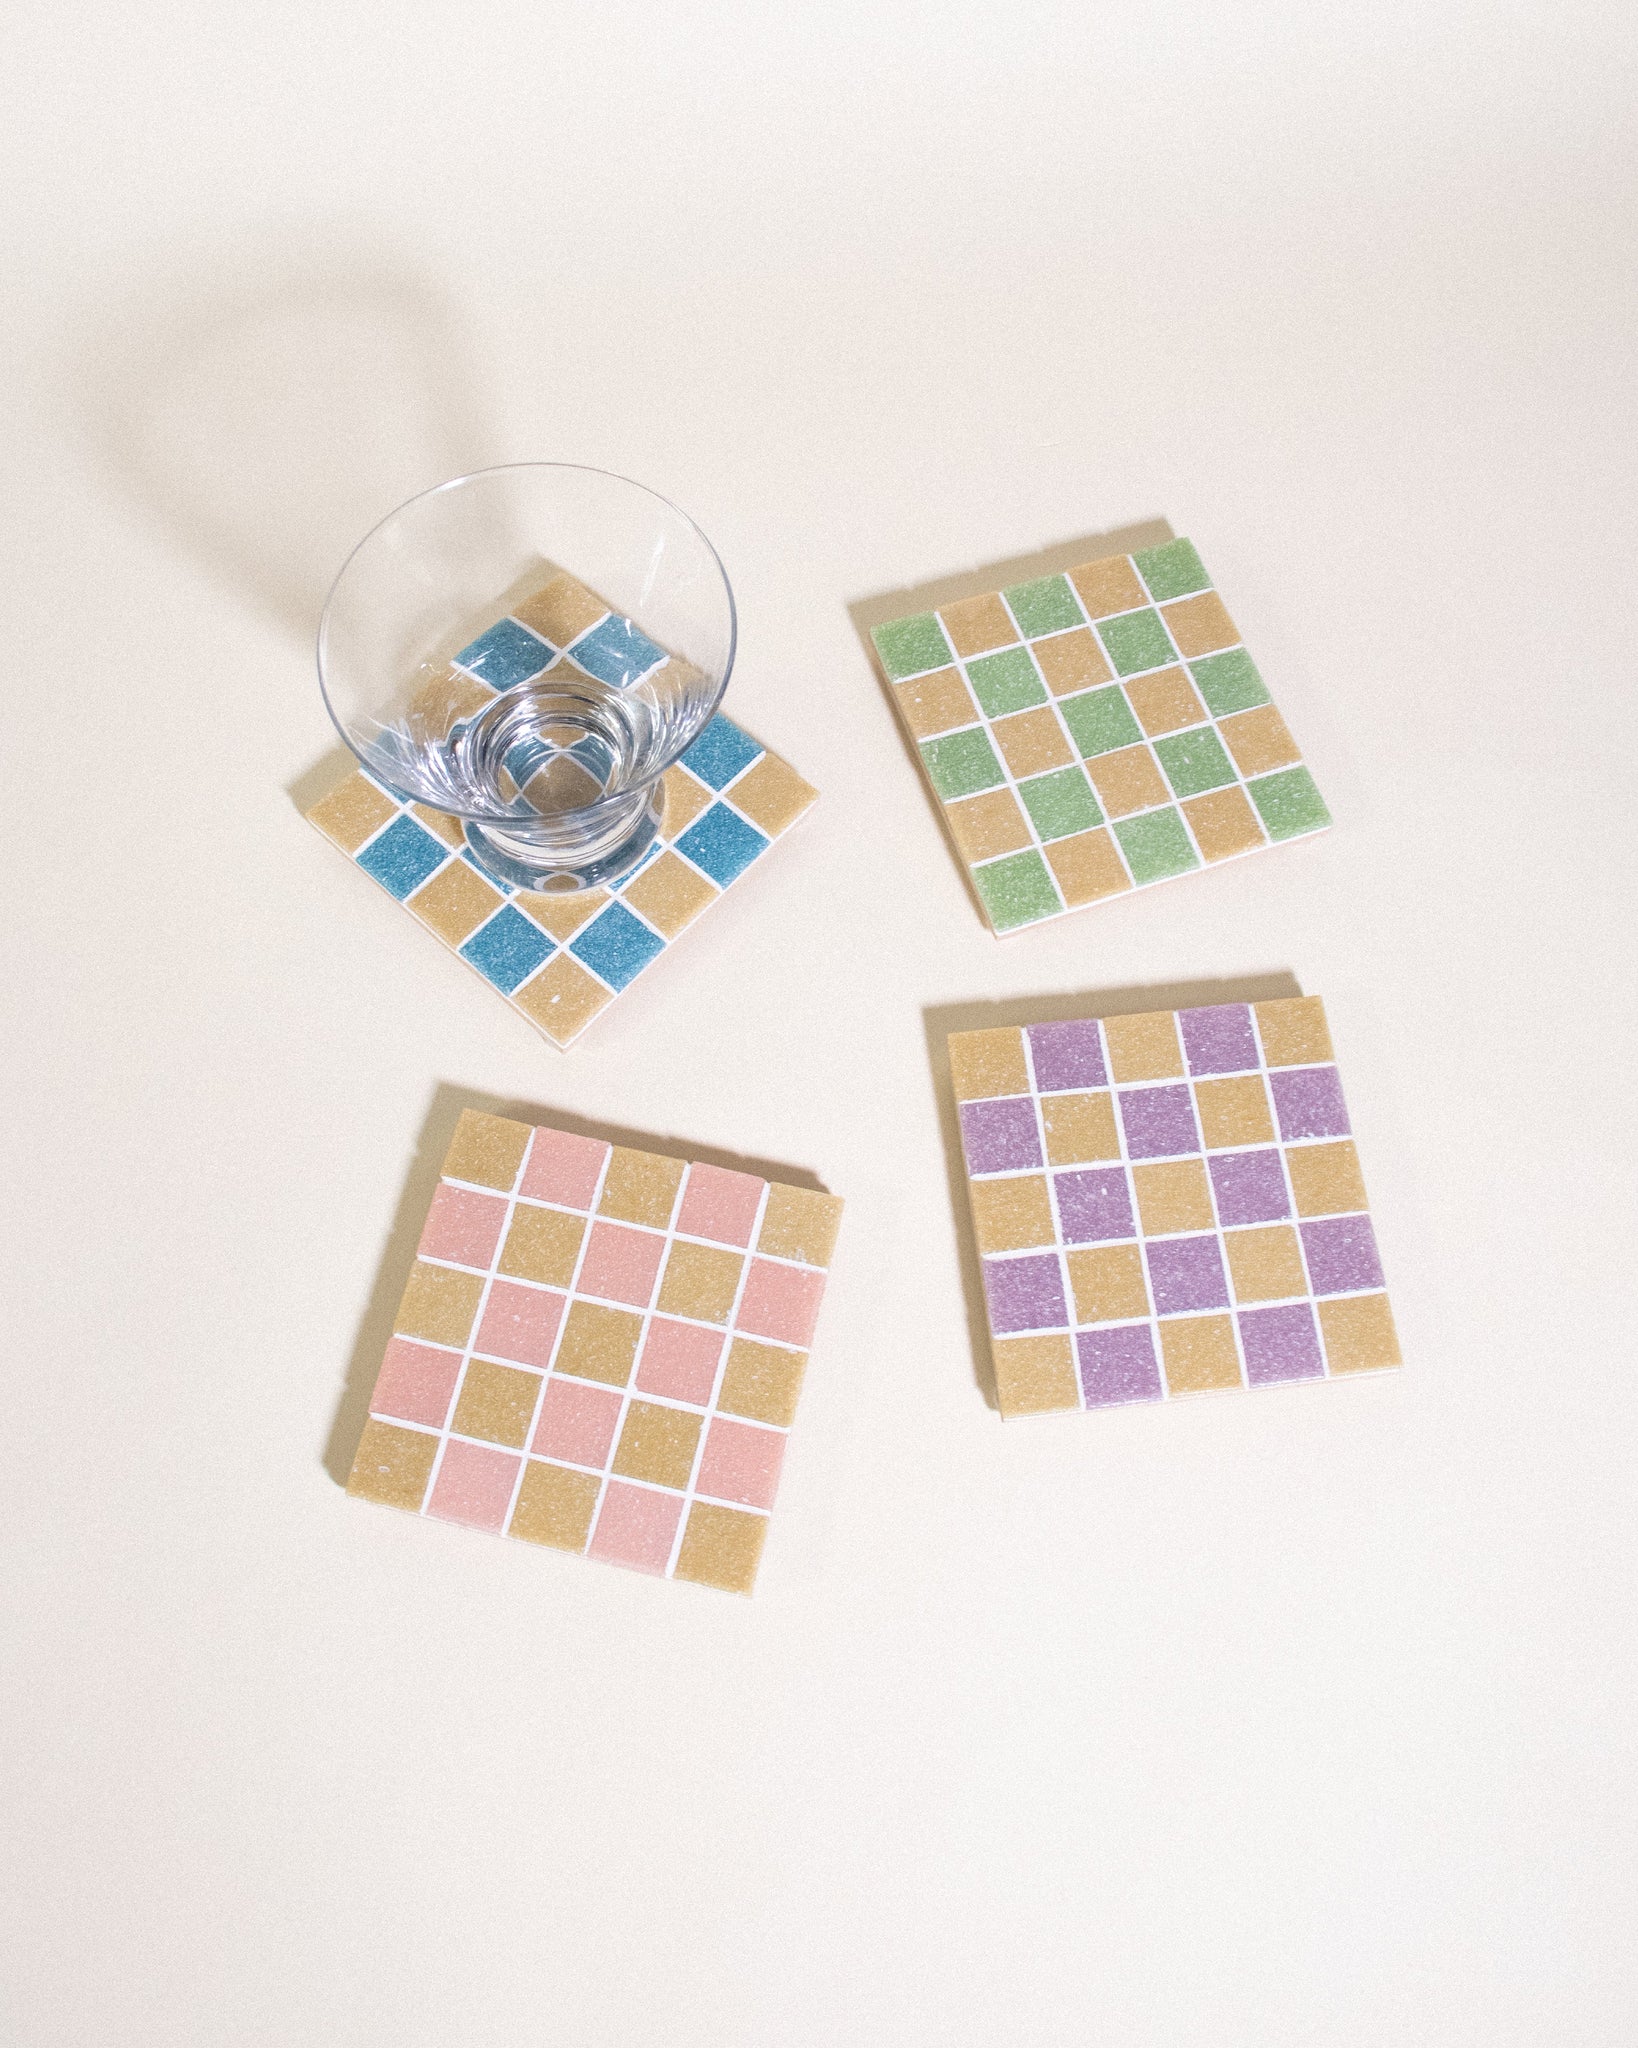 GLASS TILE COASTER - Sour Patch Candy - 12